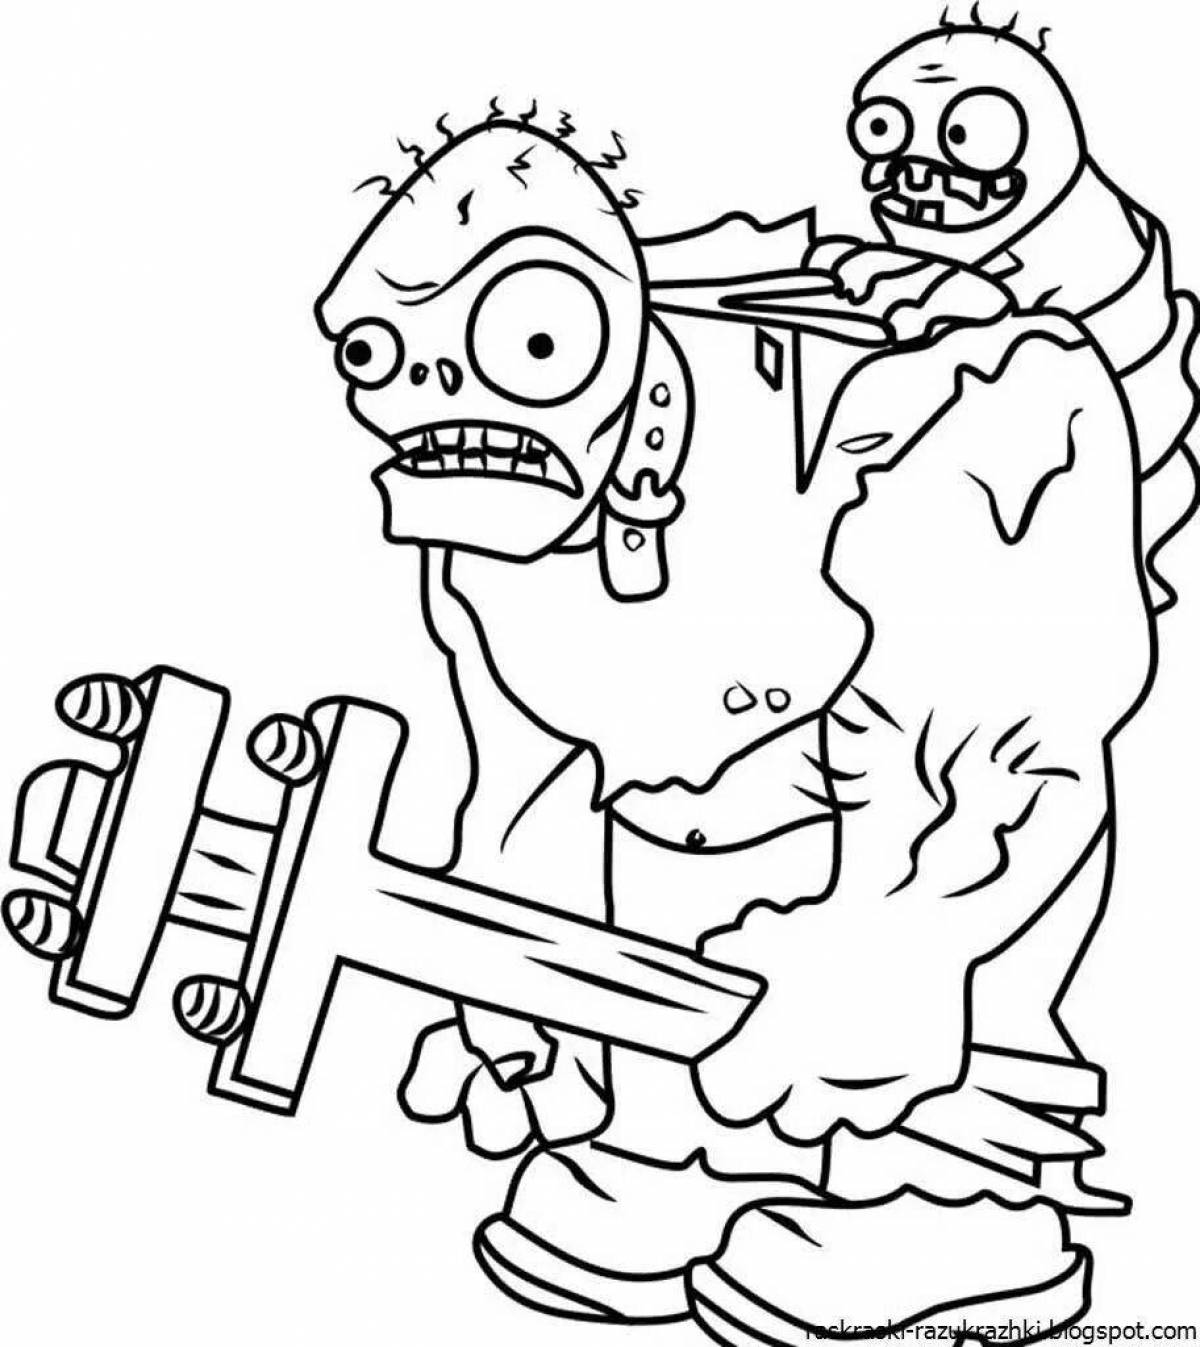 Unnerving ace zombie coloring book